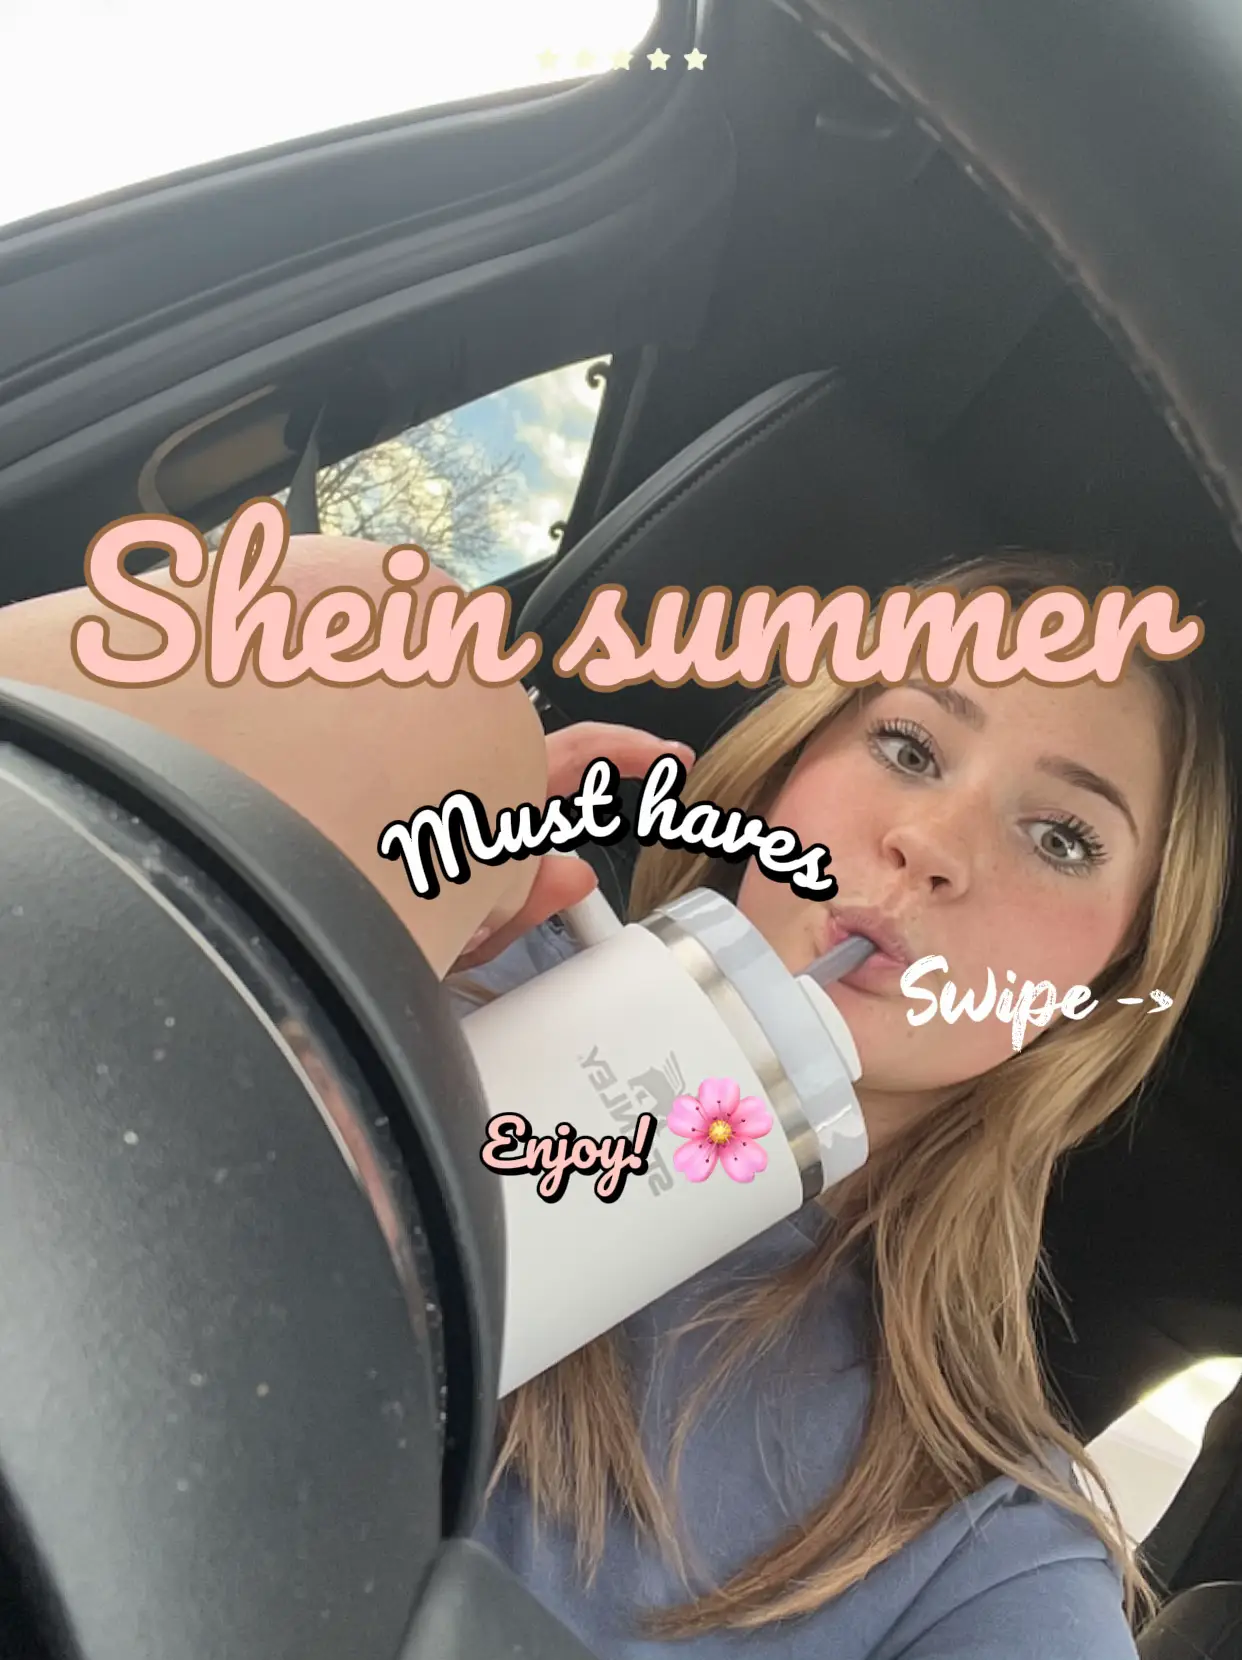 SHEIN SXY HAUL - GET SUMMER READY- MUST HAVE ITEMS 